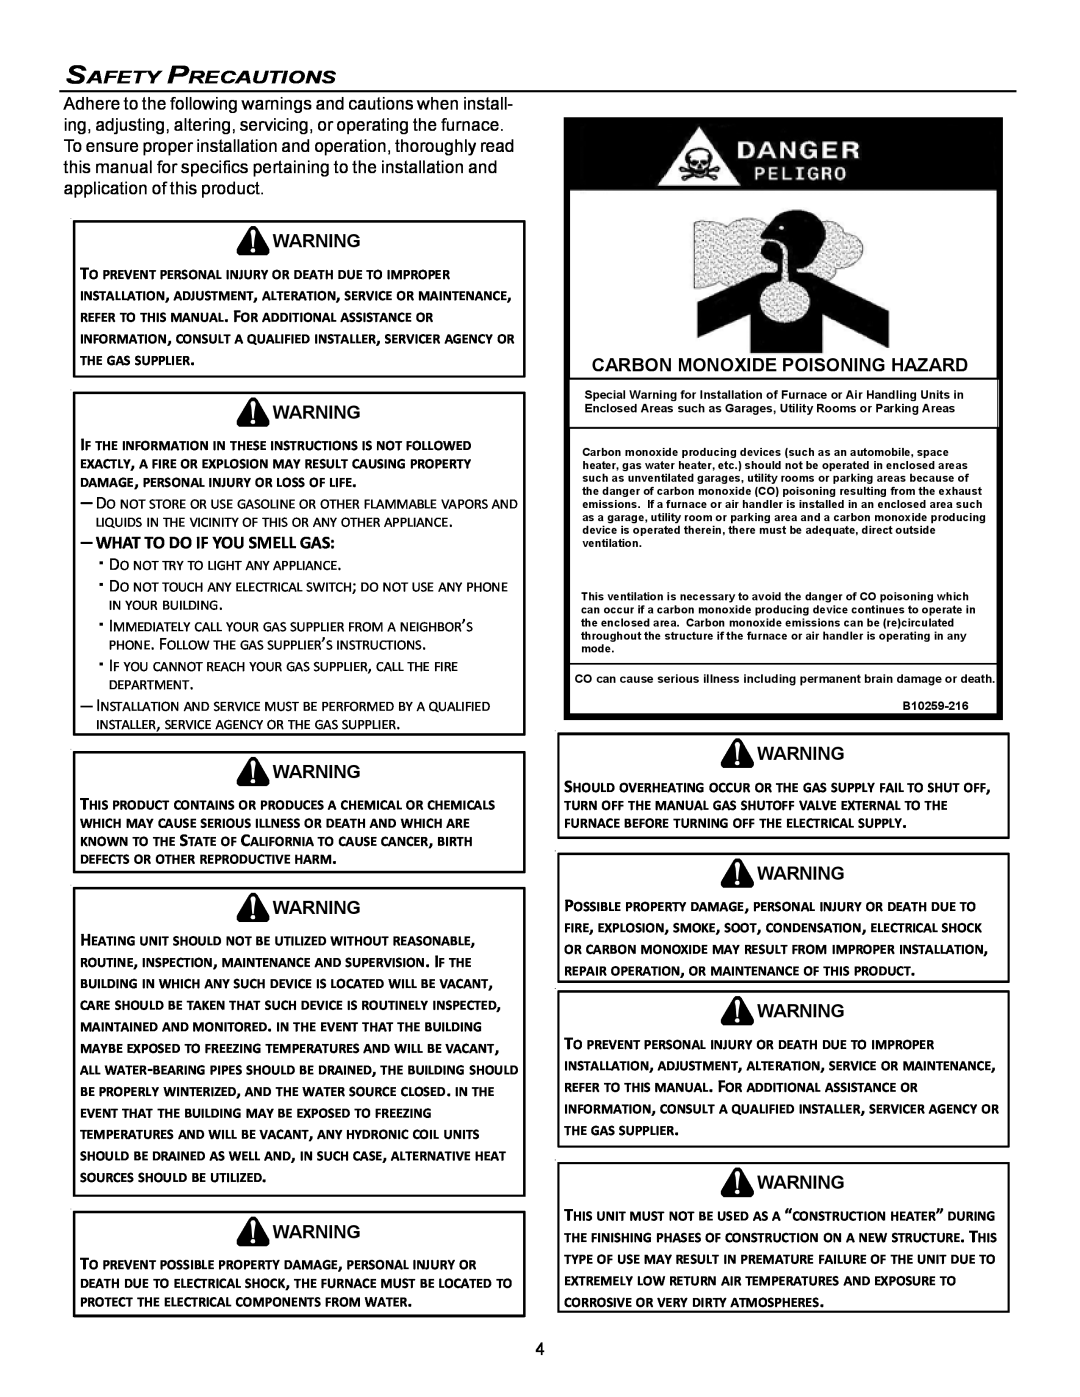 Goodman Mfg VC8 instruction manual Carbon Monoxide Poisoning Hazard, Safety Precautions, What To Do If You Smell Gas 